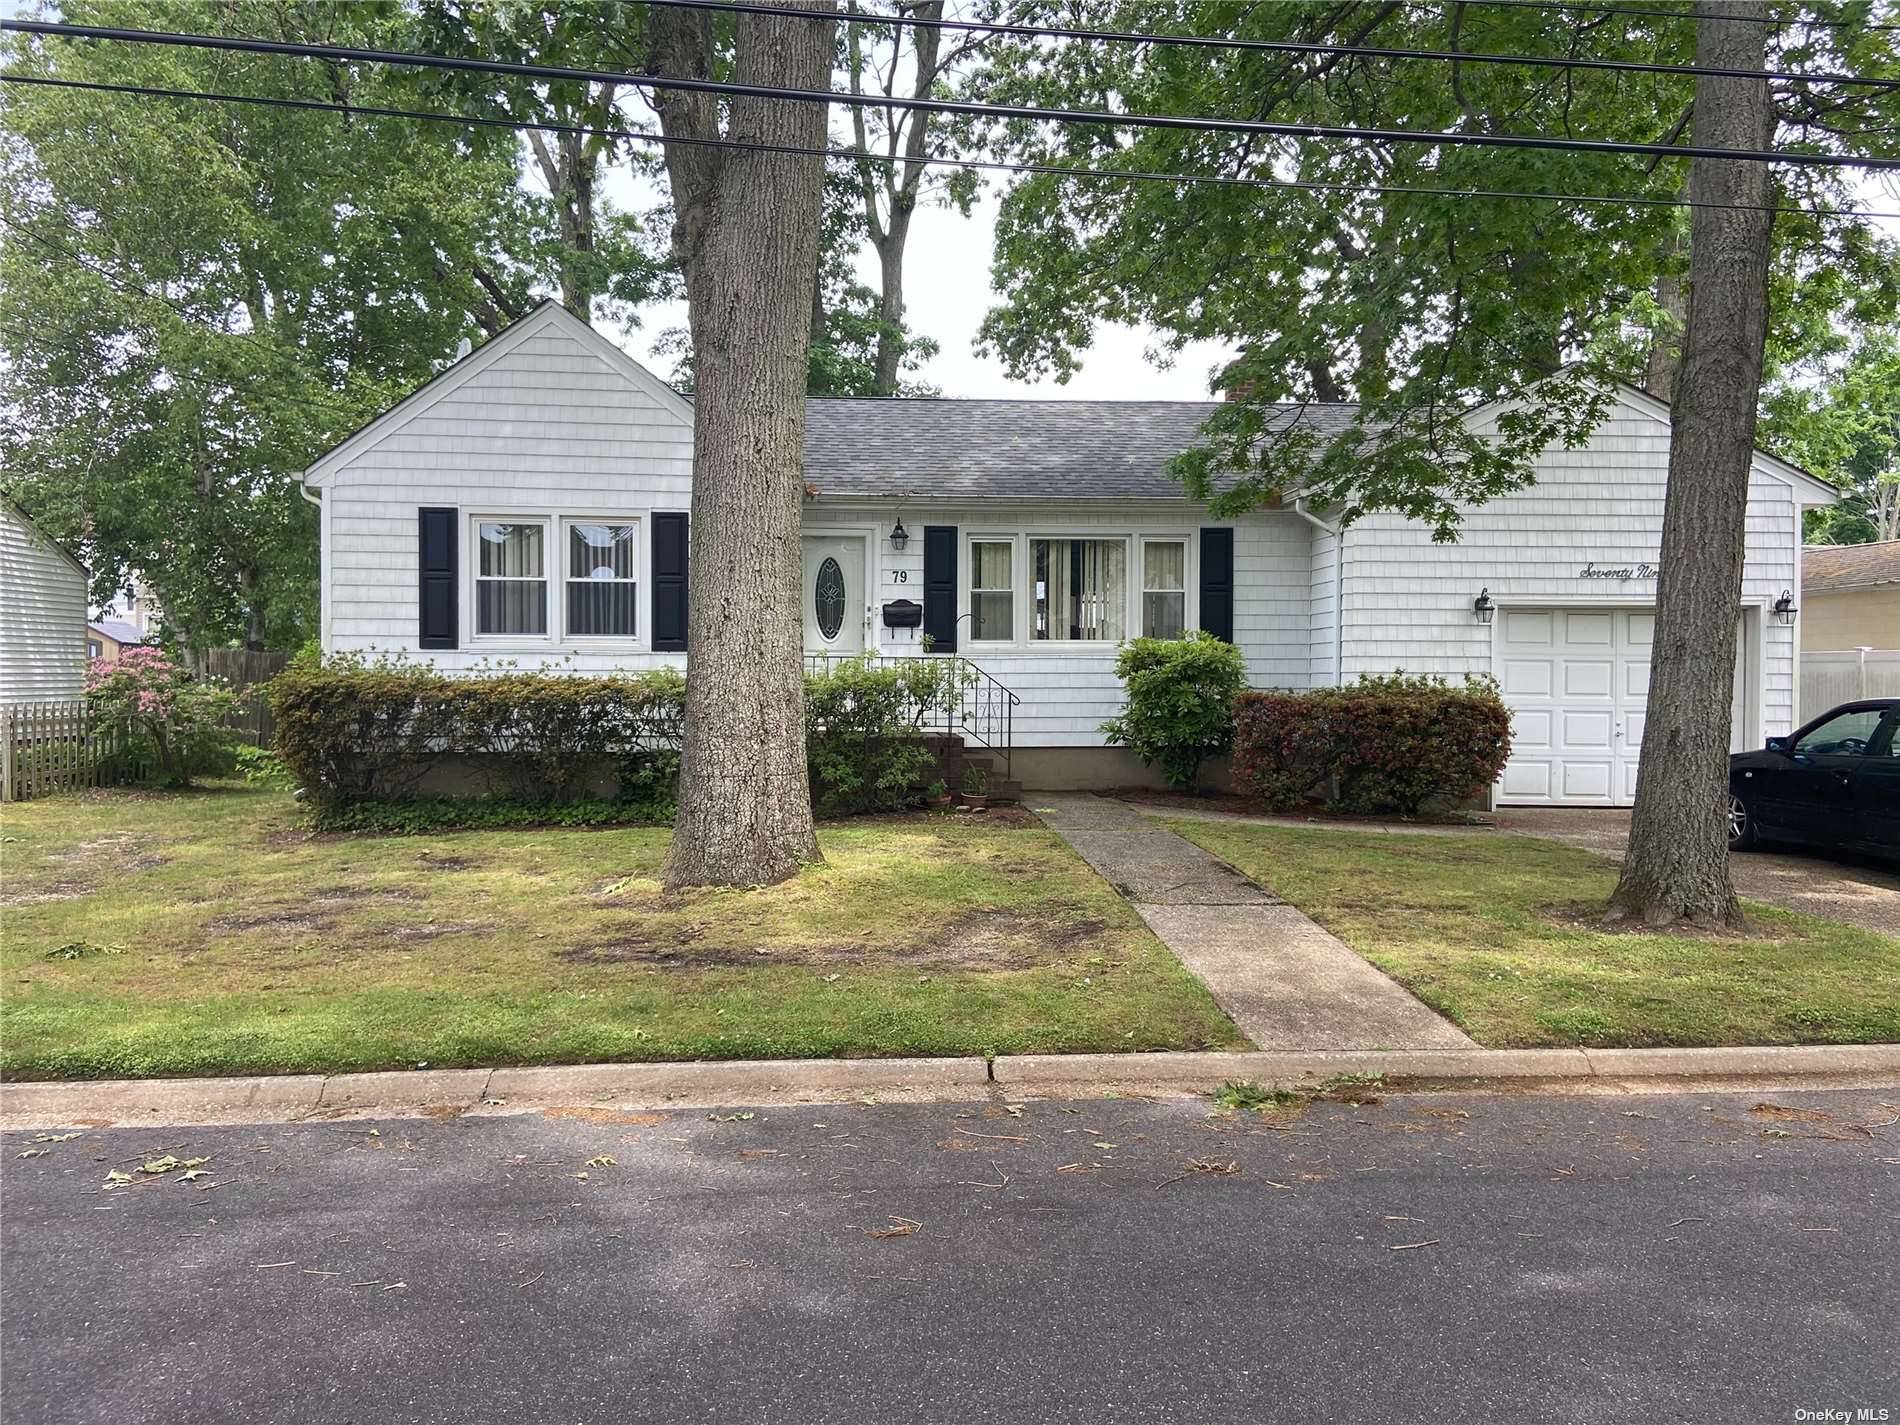 Location location location This Expanded Ranch located in the heart of the Desirable Poet Section in North Babylon features 3 Bedrooms and 2 Full Baths Living Room, Formal Dining, Eat ...